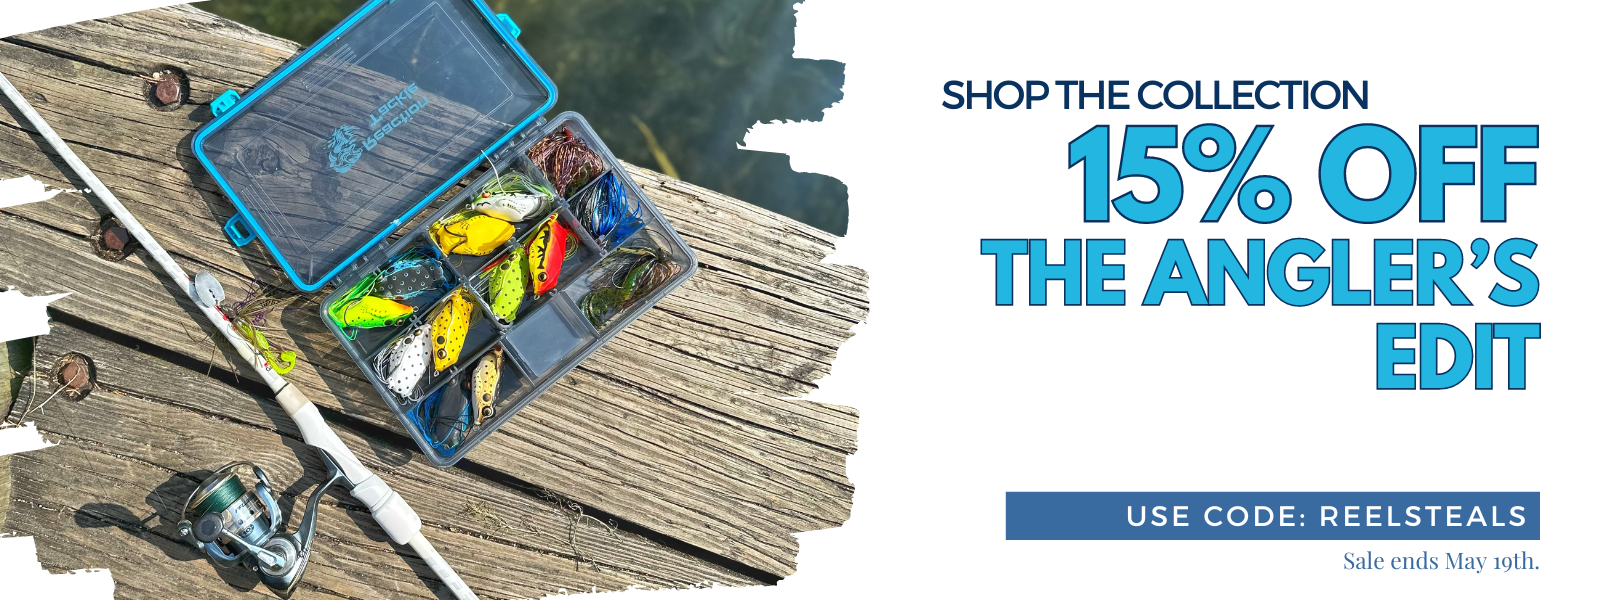 15% off The Angler's Edit